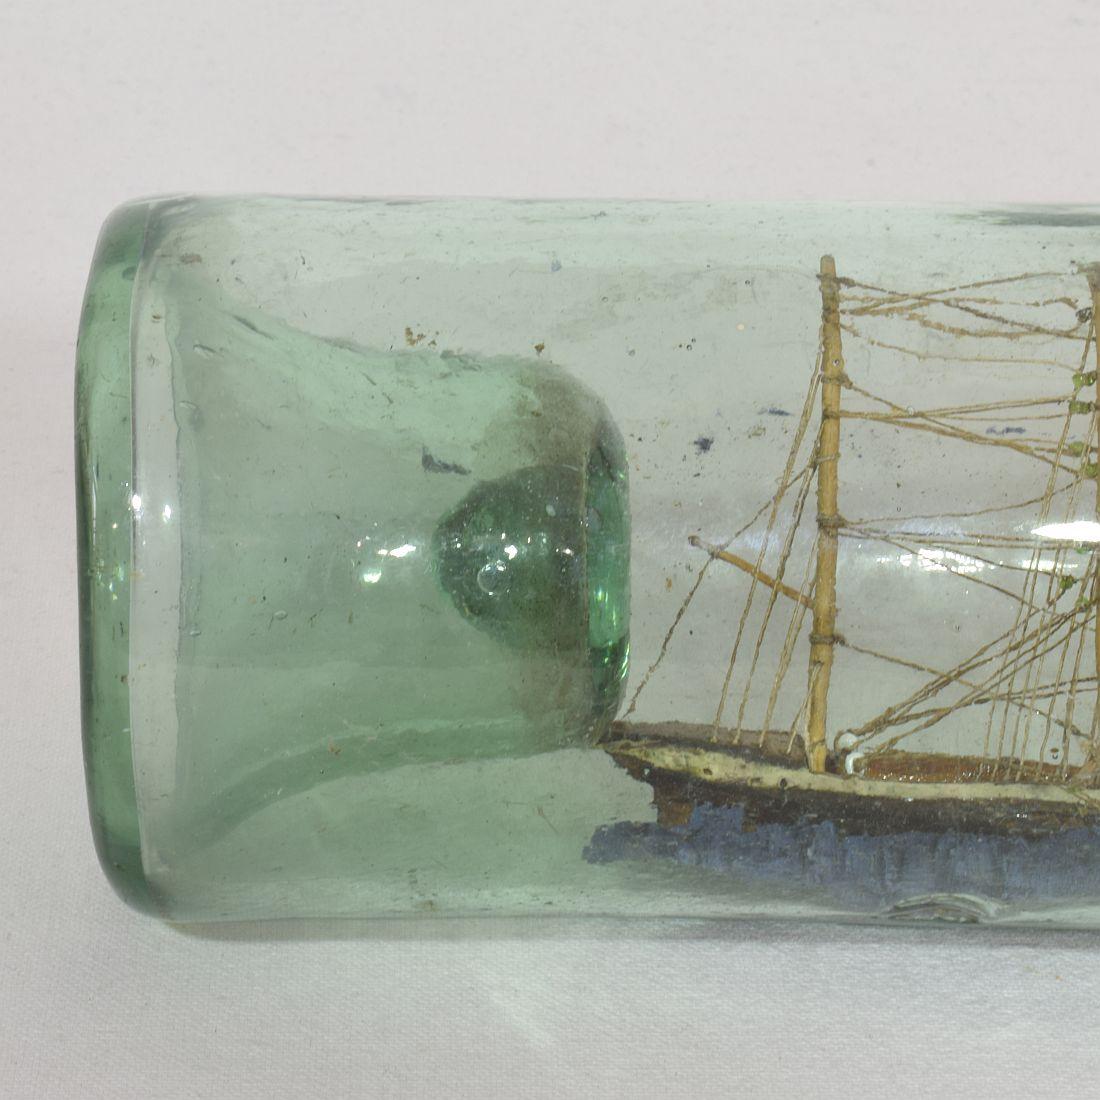 French, 19th Century, Model Ship in a Glass Bottle 7